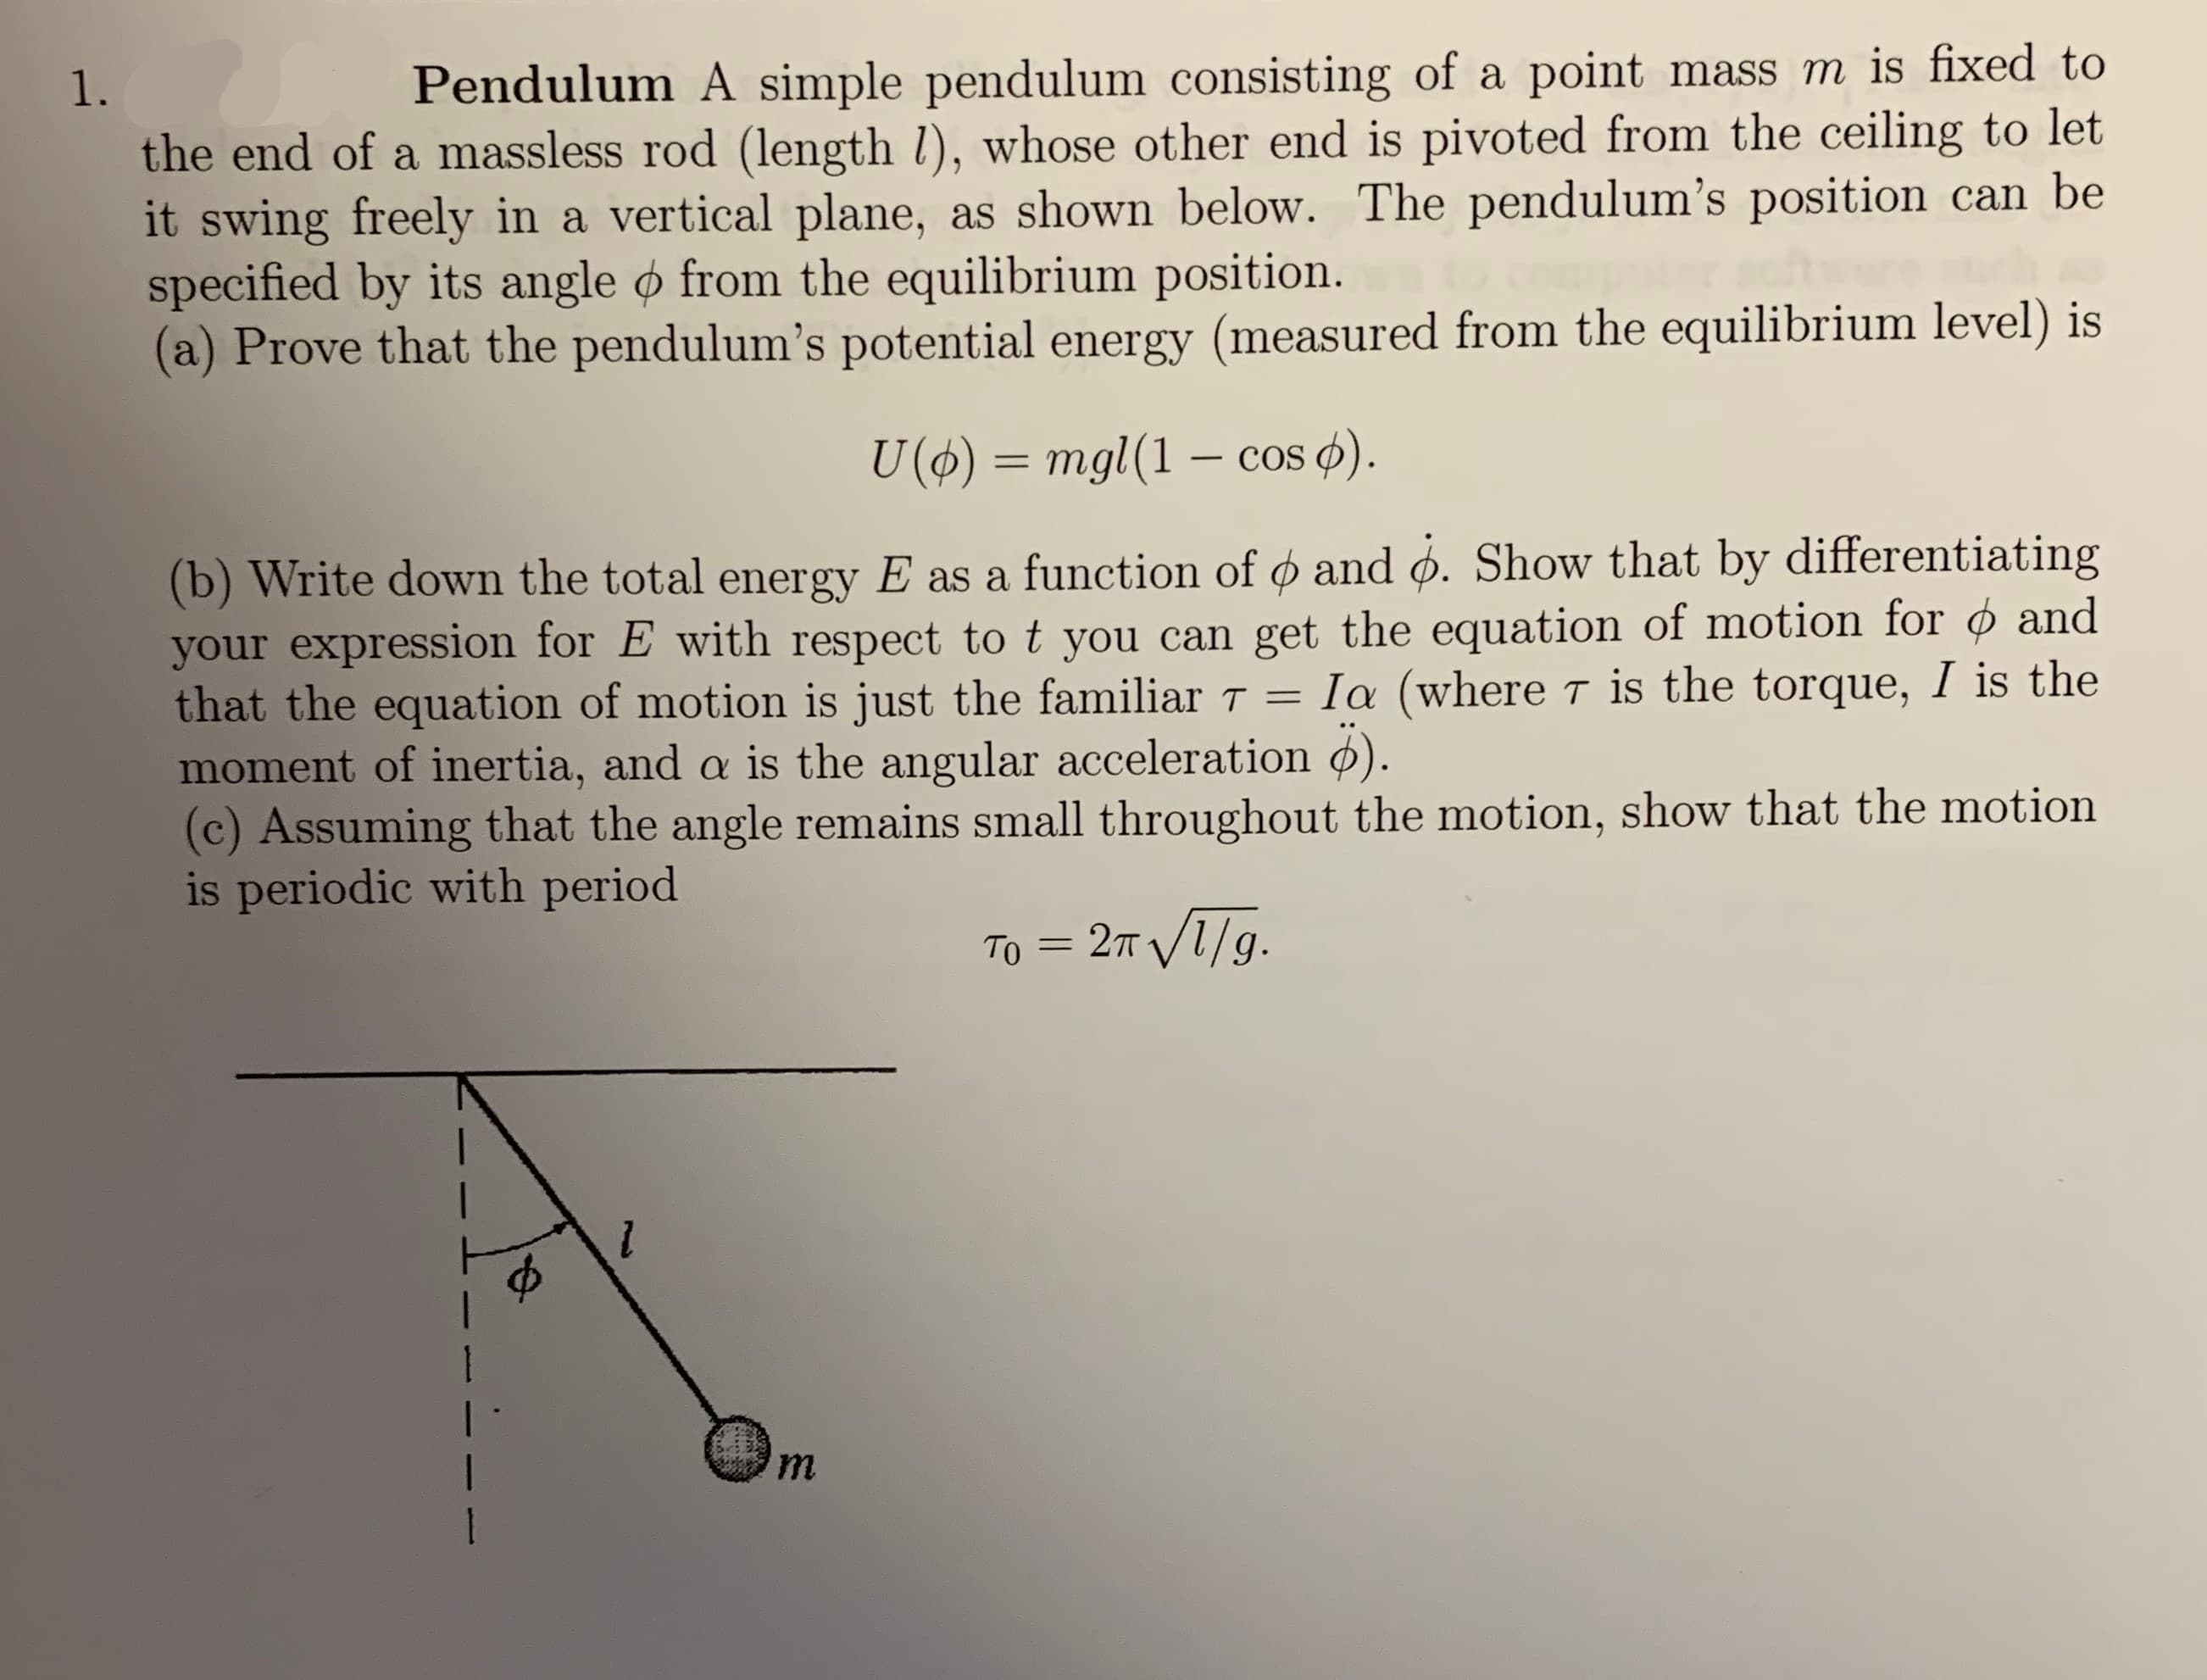 mass m is fixed to
Pendulum A simple pendulum consisting of a point
1.
the end of a massless rod (length /), whose other end is pivoted from the ceiling to let
it swing freely in a vertical plane,
specified by its angle o from the equilibrium position.
(a) Prove that the pendulum's potential energy (measured from the equilibrium level) is
as shown below. The pendulum's position can be
U ()mgl (1 - cos )
(b) Write down the total energy E as a function of and o. Show that by differentiating
your expression for E with respect to t you can get the equation of motion for ¢ and
that the equation of motion is just the familiar T
moment of inertia, and a is the angular acceleration ).
(c) Assuming that the angle remains small throughout the motion, show that the motion
is periodic with period
Ia (where T is the torque, I is the
- 2т V1/9.
Tо
m
1
